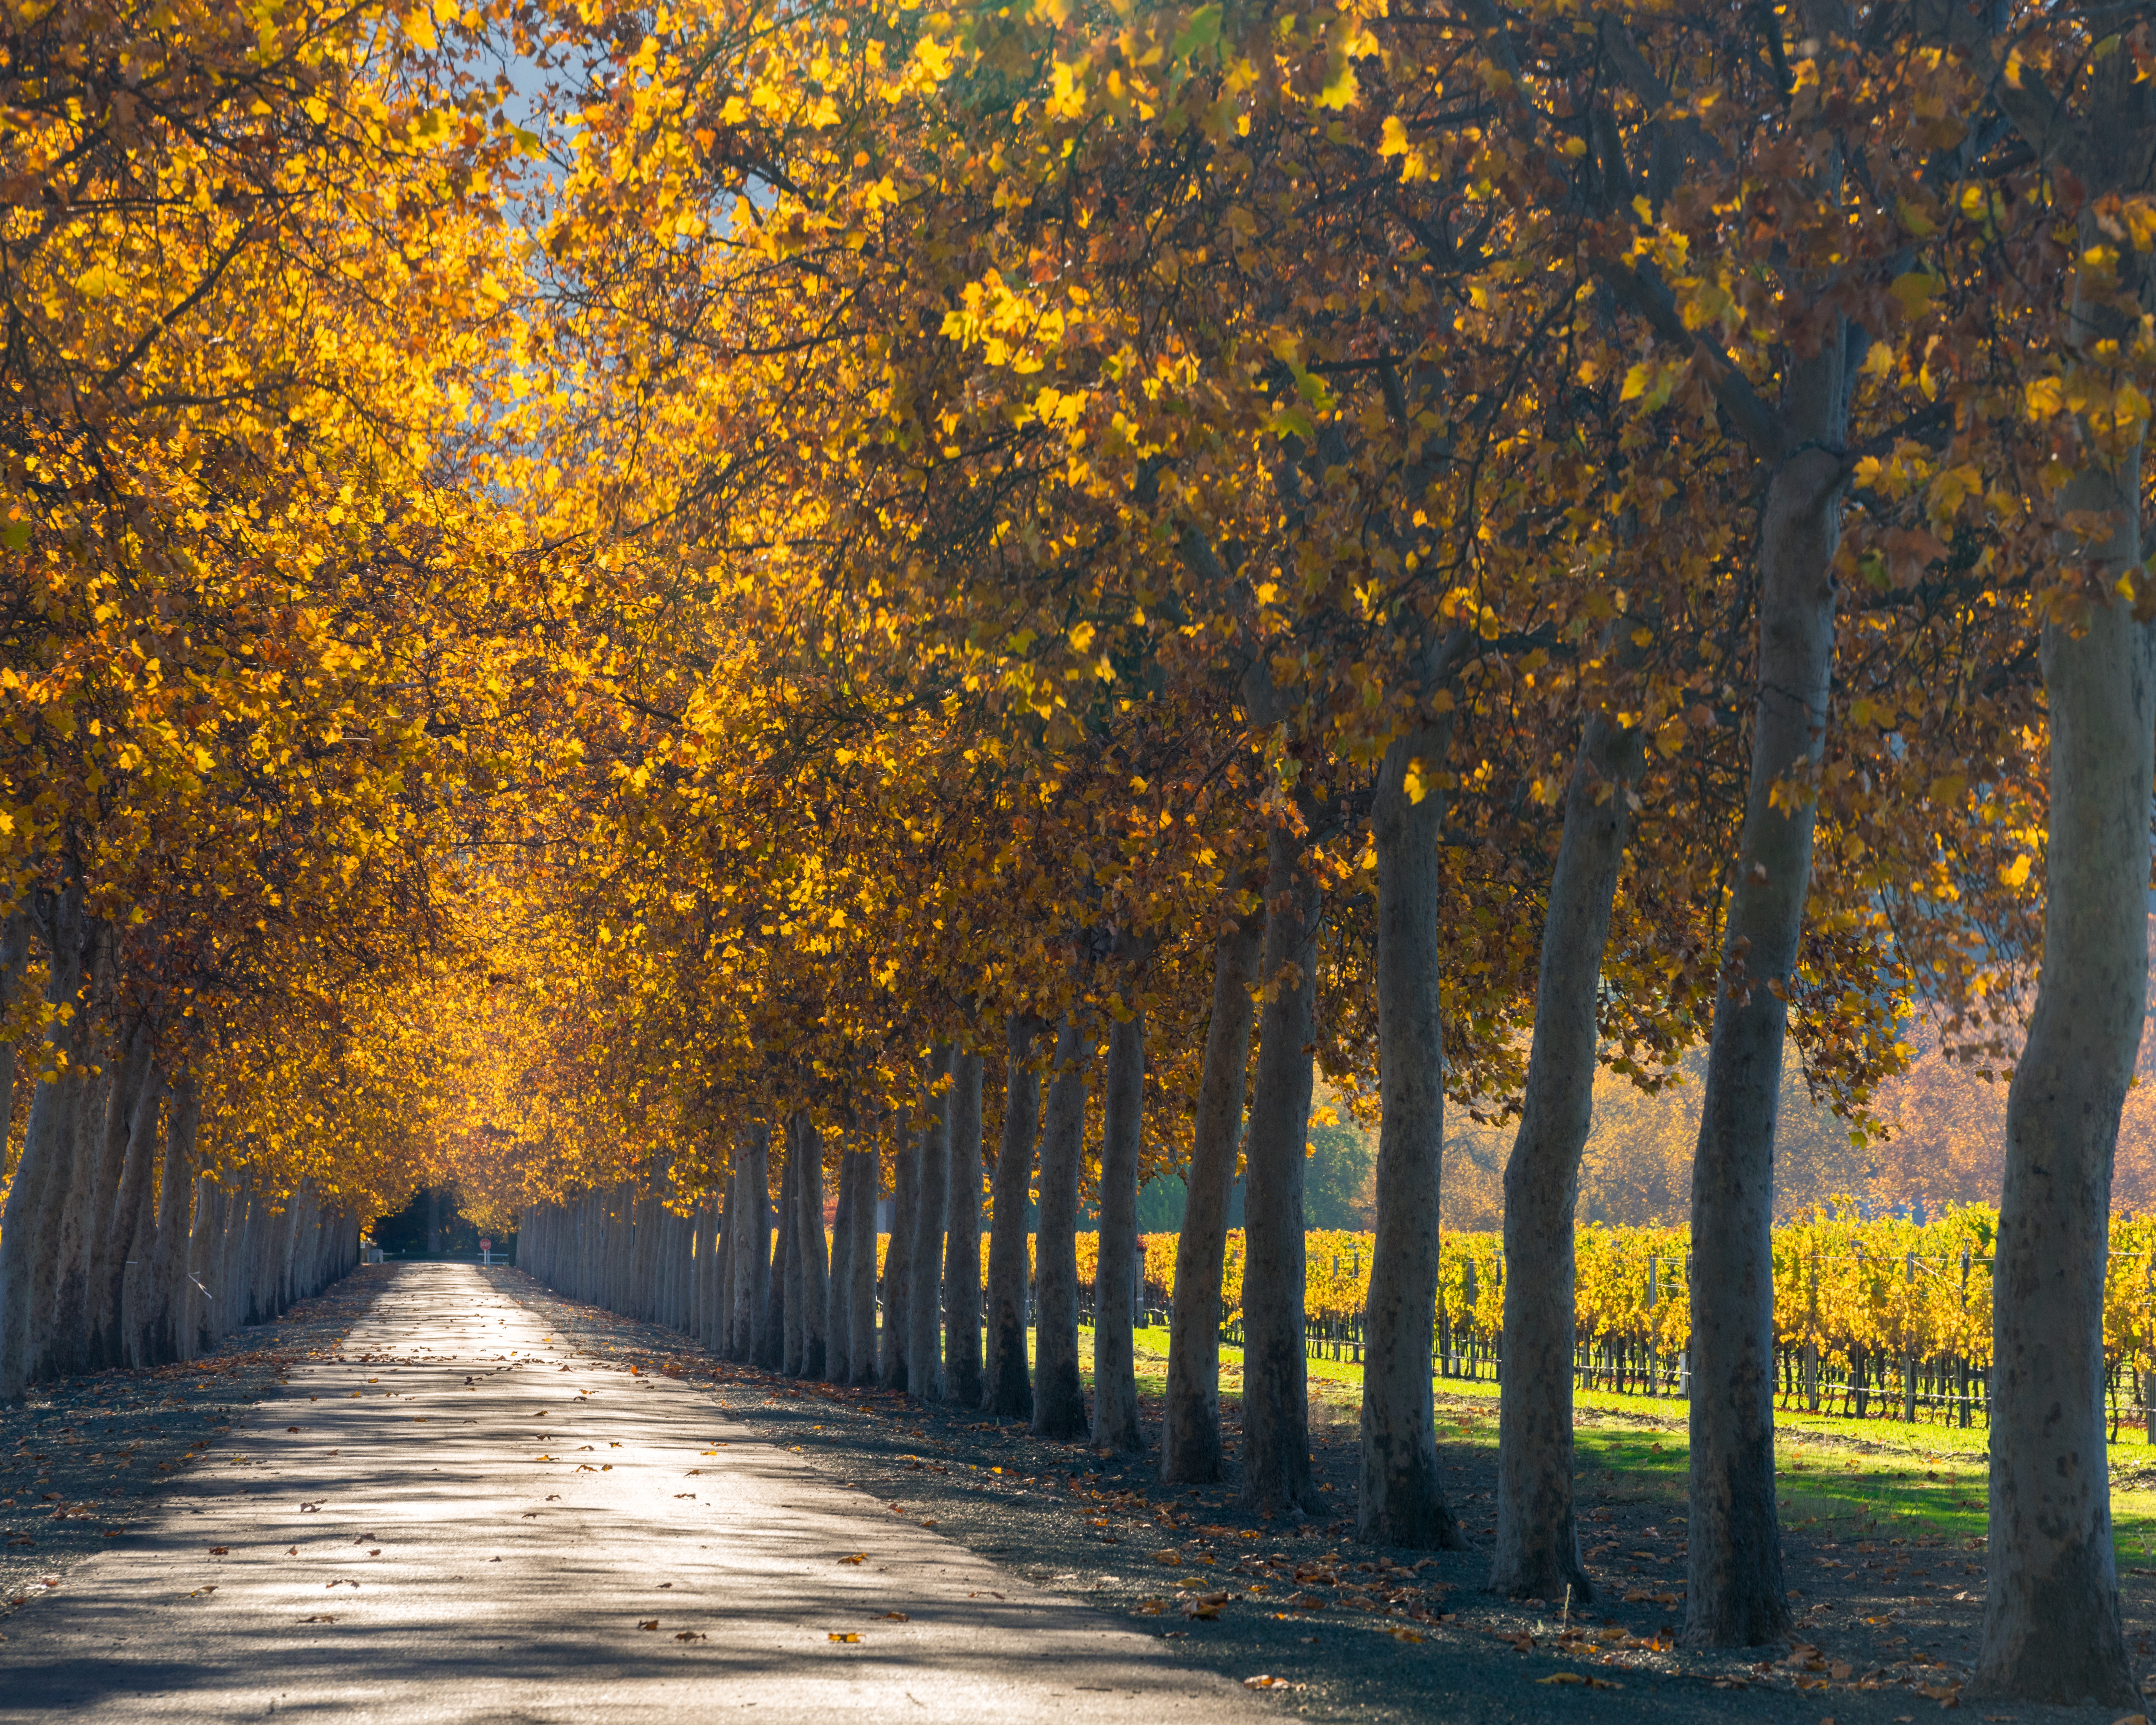 Autumn vineyard roadway in Rutherford lined with colorful trees